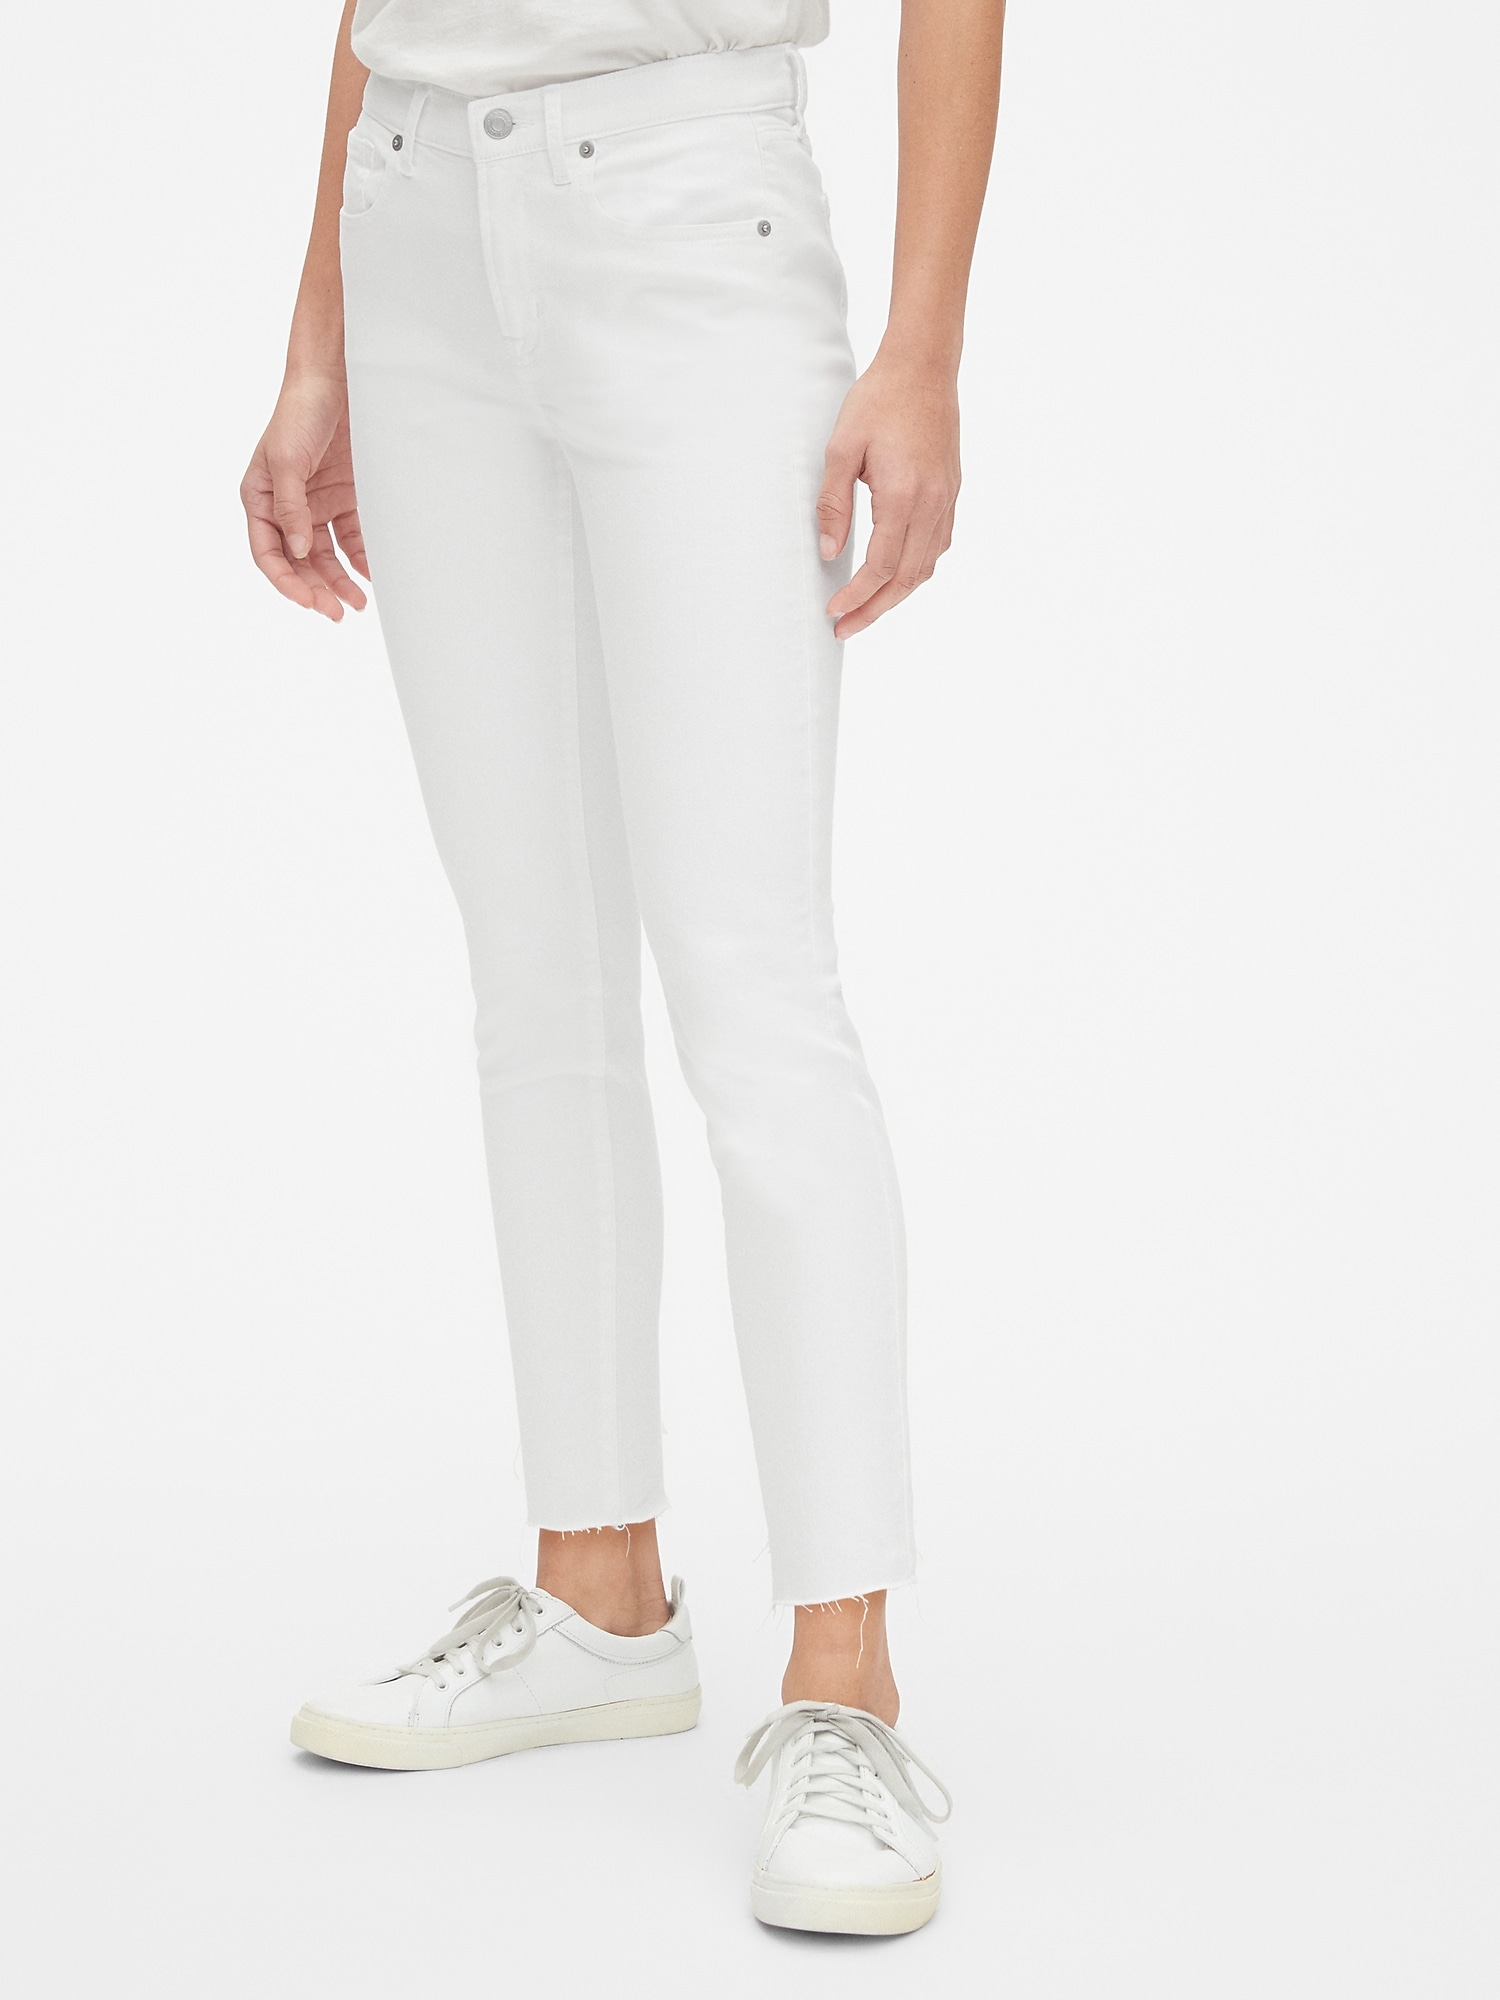 gap high rise true skinny ankle jeans